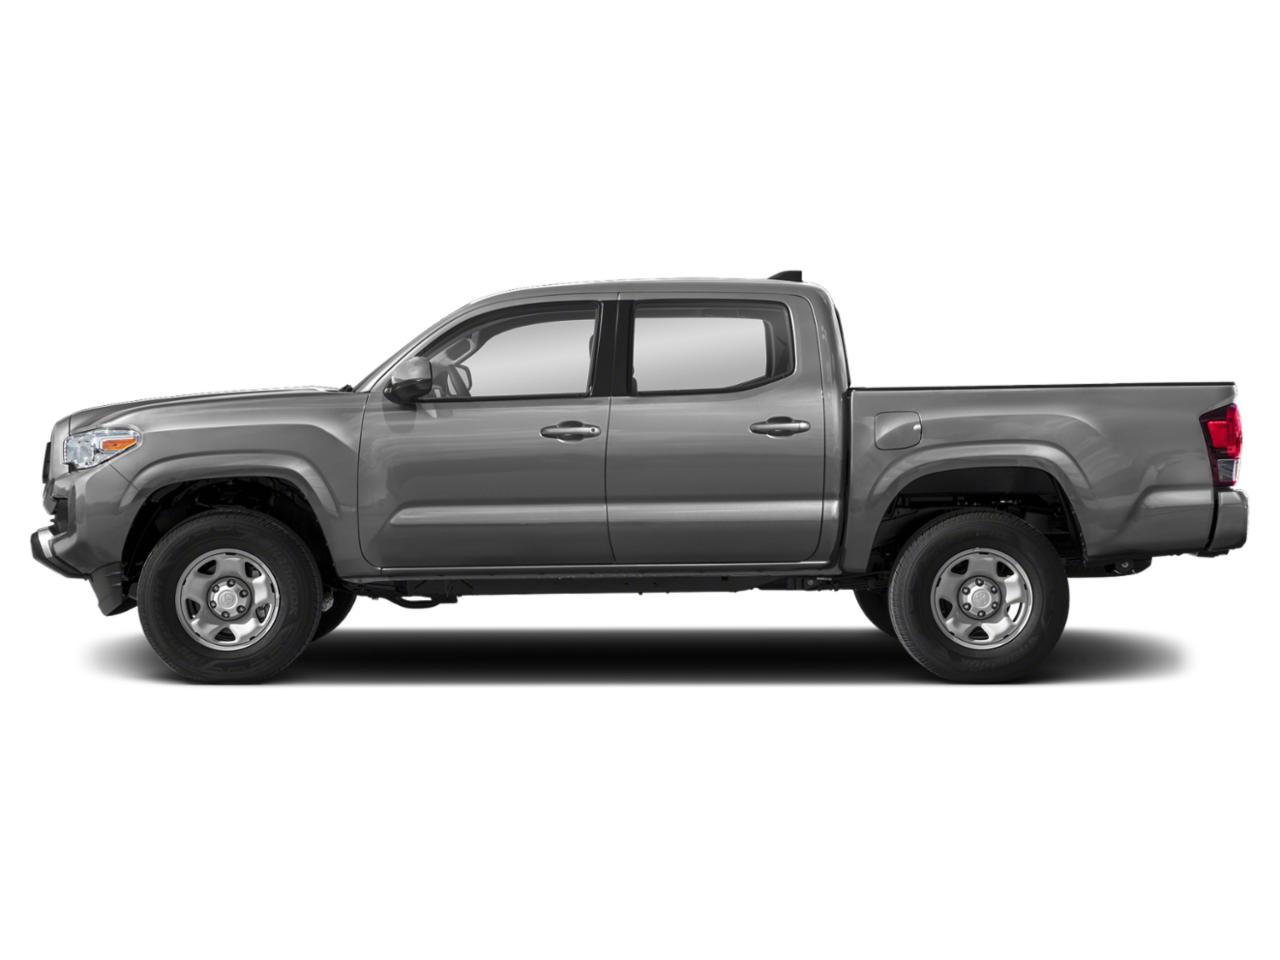 Used 2021 Toyota Tacoma TRD Off Road with VIN 5TFCZ5AN8MX275493 for sale in Little Rock